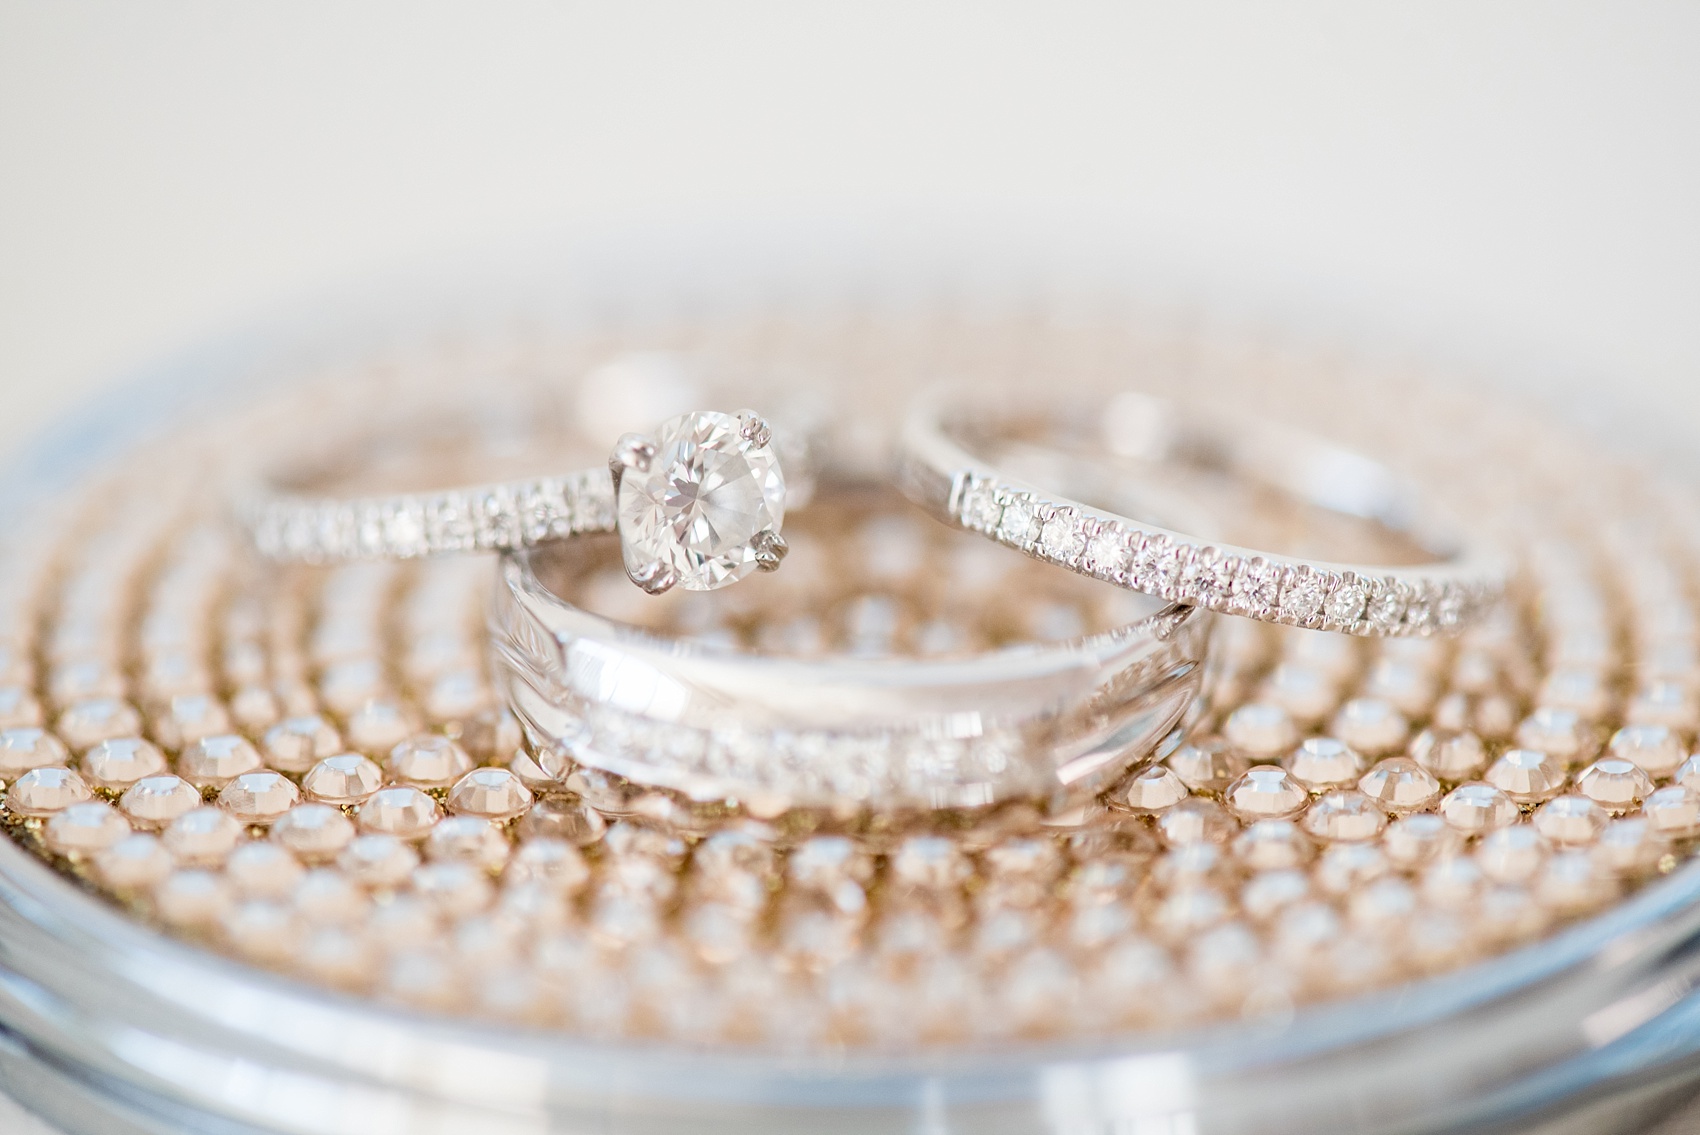 Mikkel Paige Photography photos of a small wedding at The Stockroom at 230 in downtown Raleigh, North Carolina. Detail image of the white gold diamond rings.